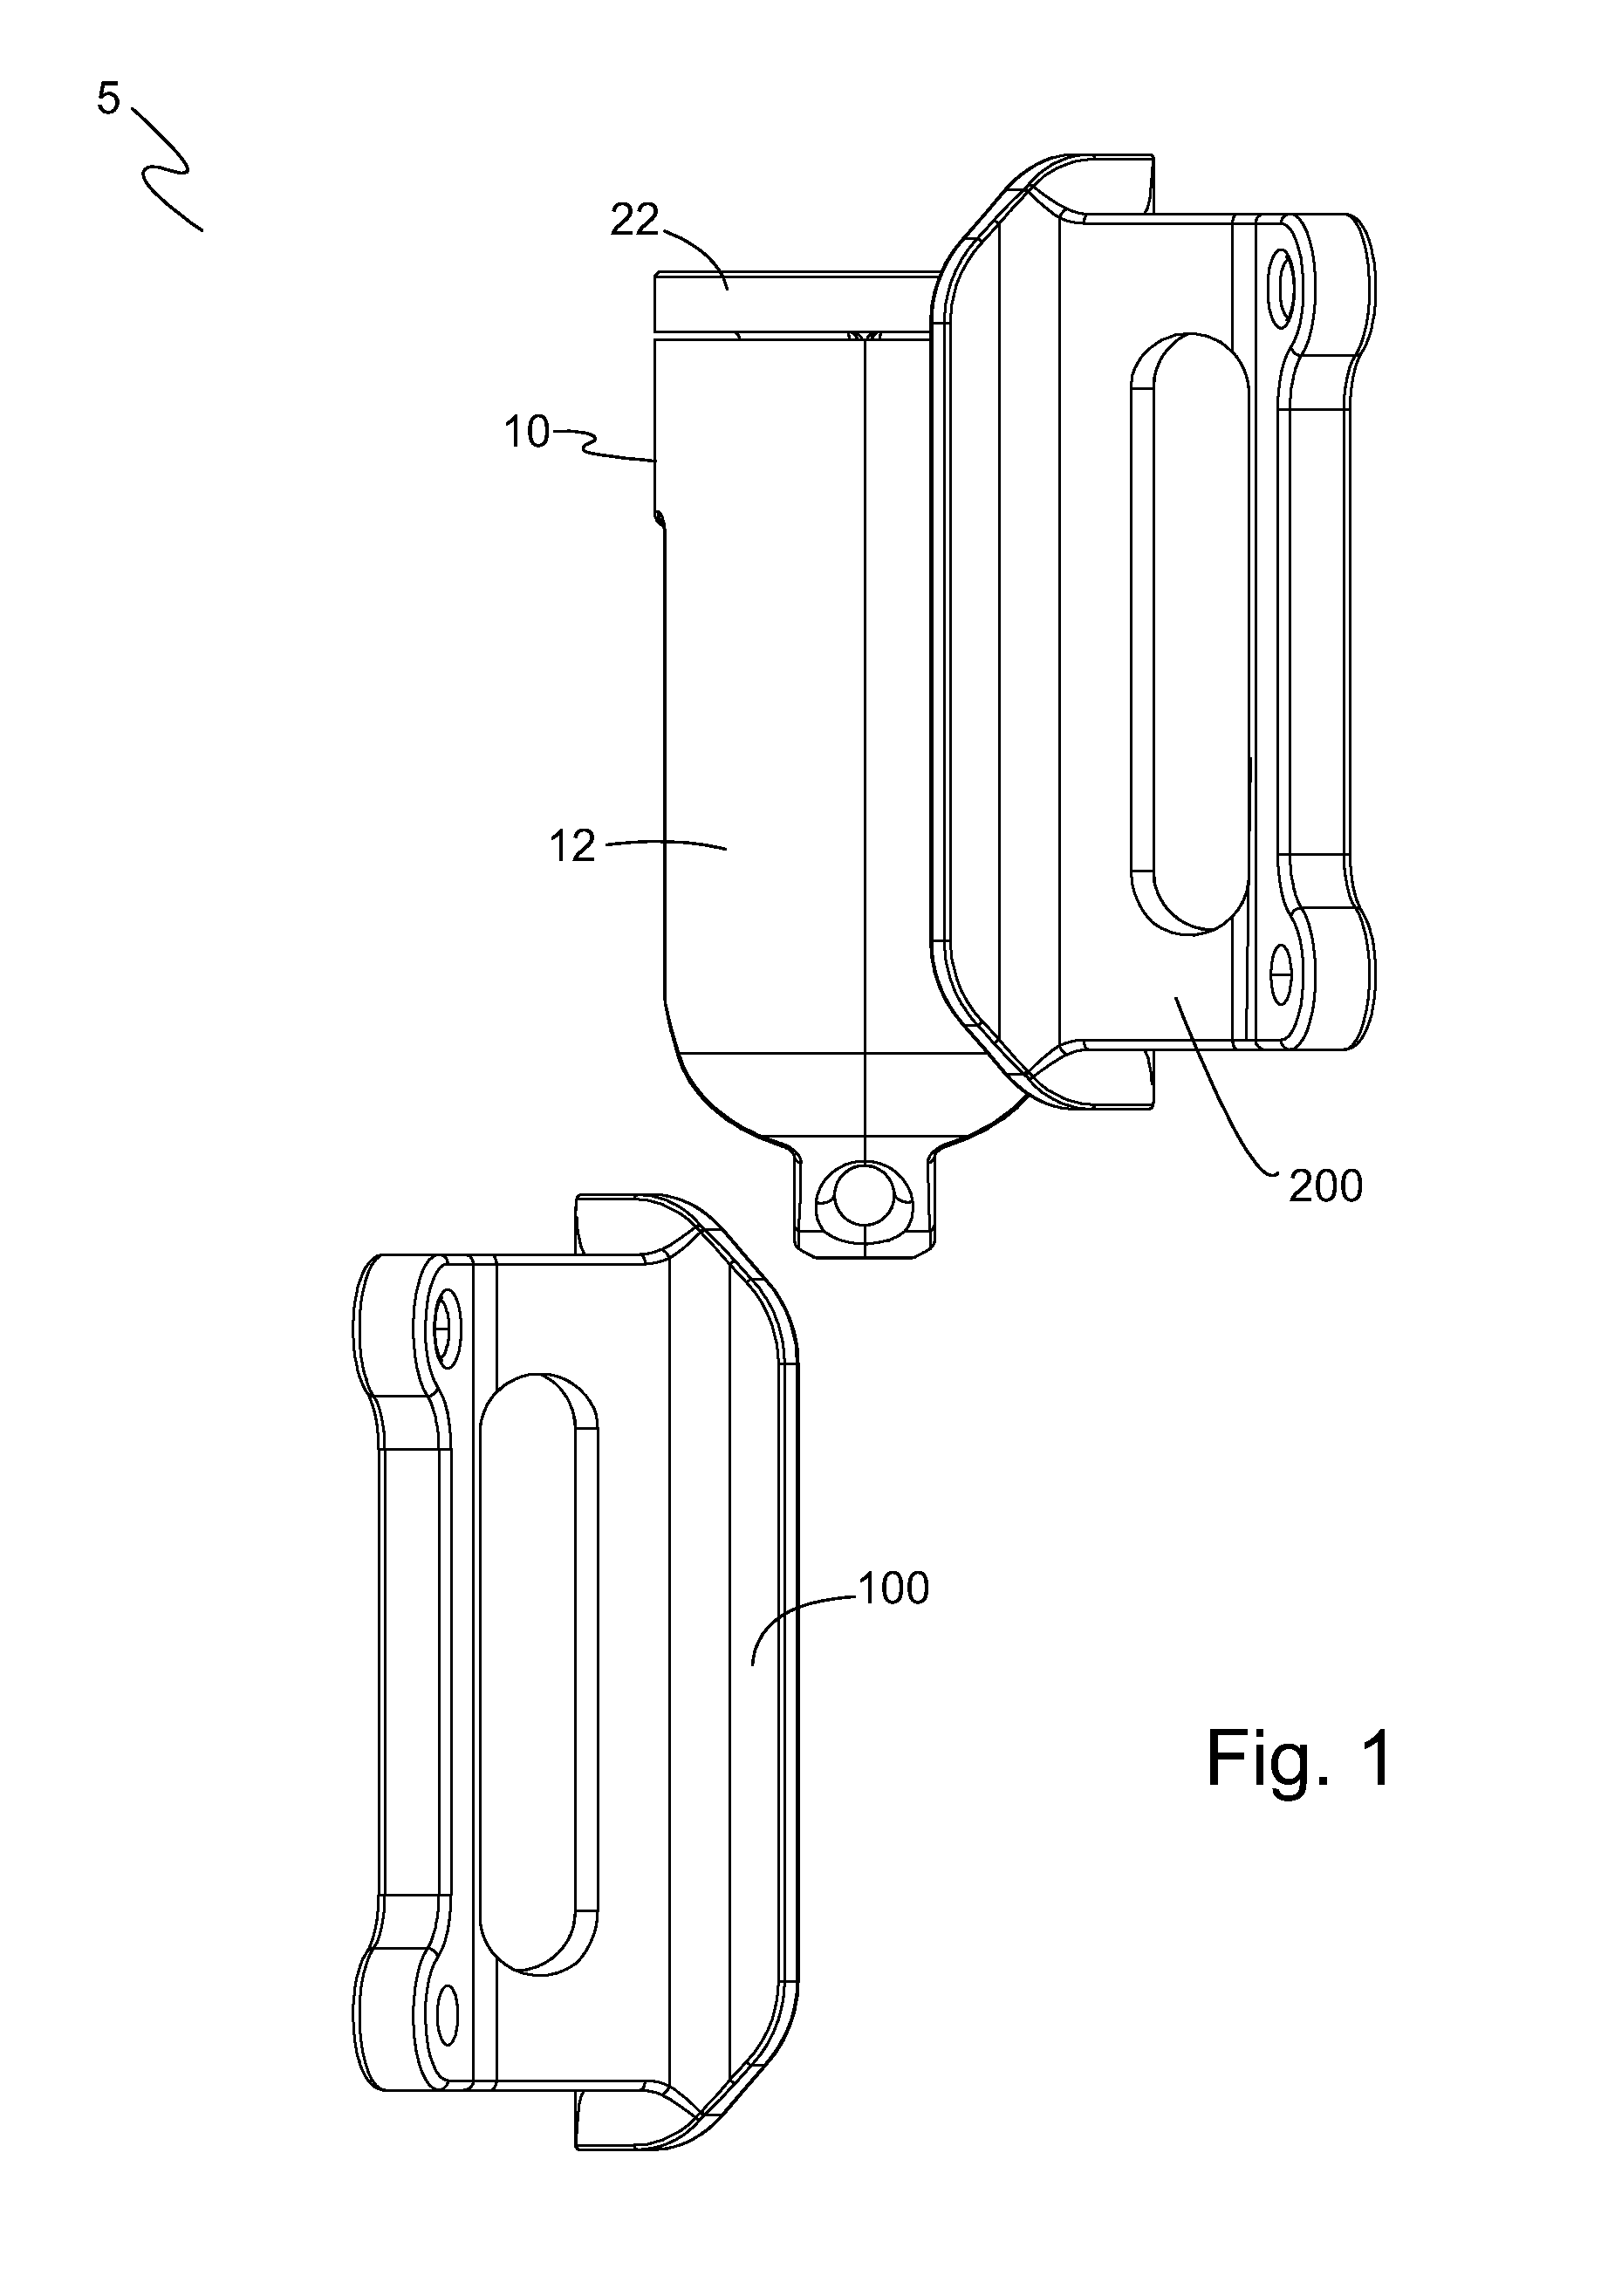 Attachment system for hand-held tools